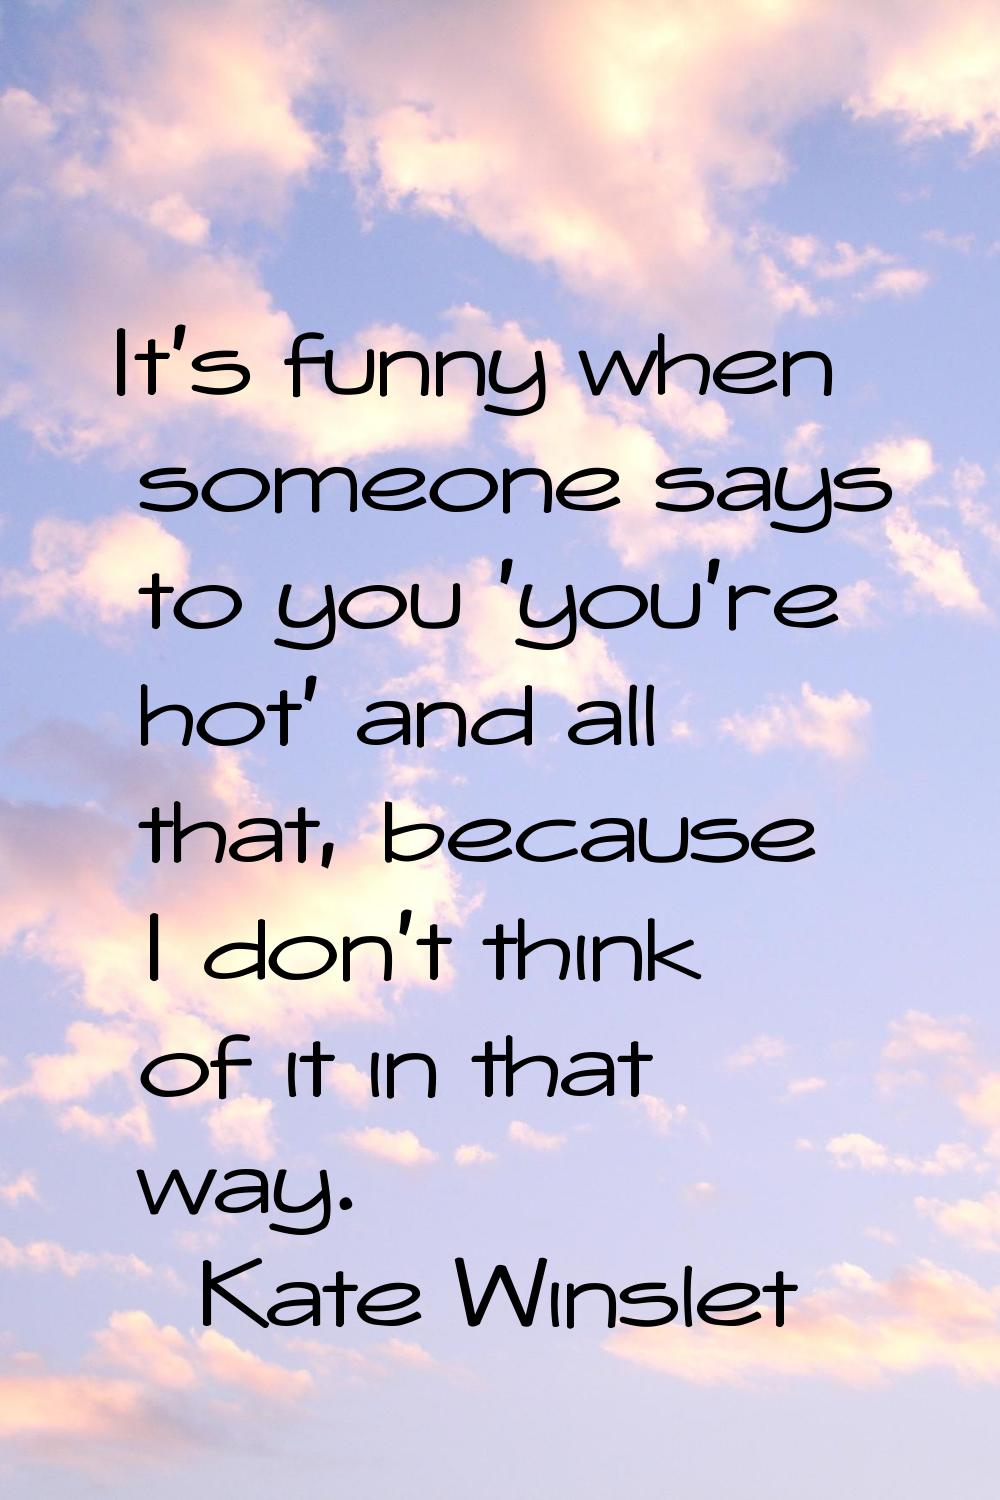 It's funny when someone says to you 'you're hot' and all that, because I don't think of it in that 